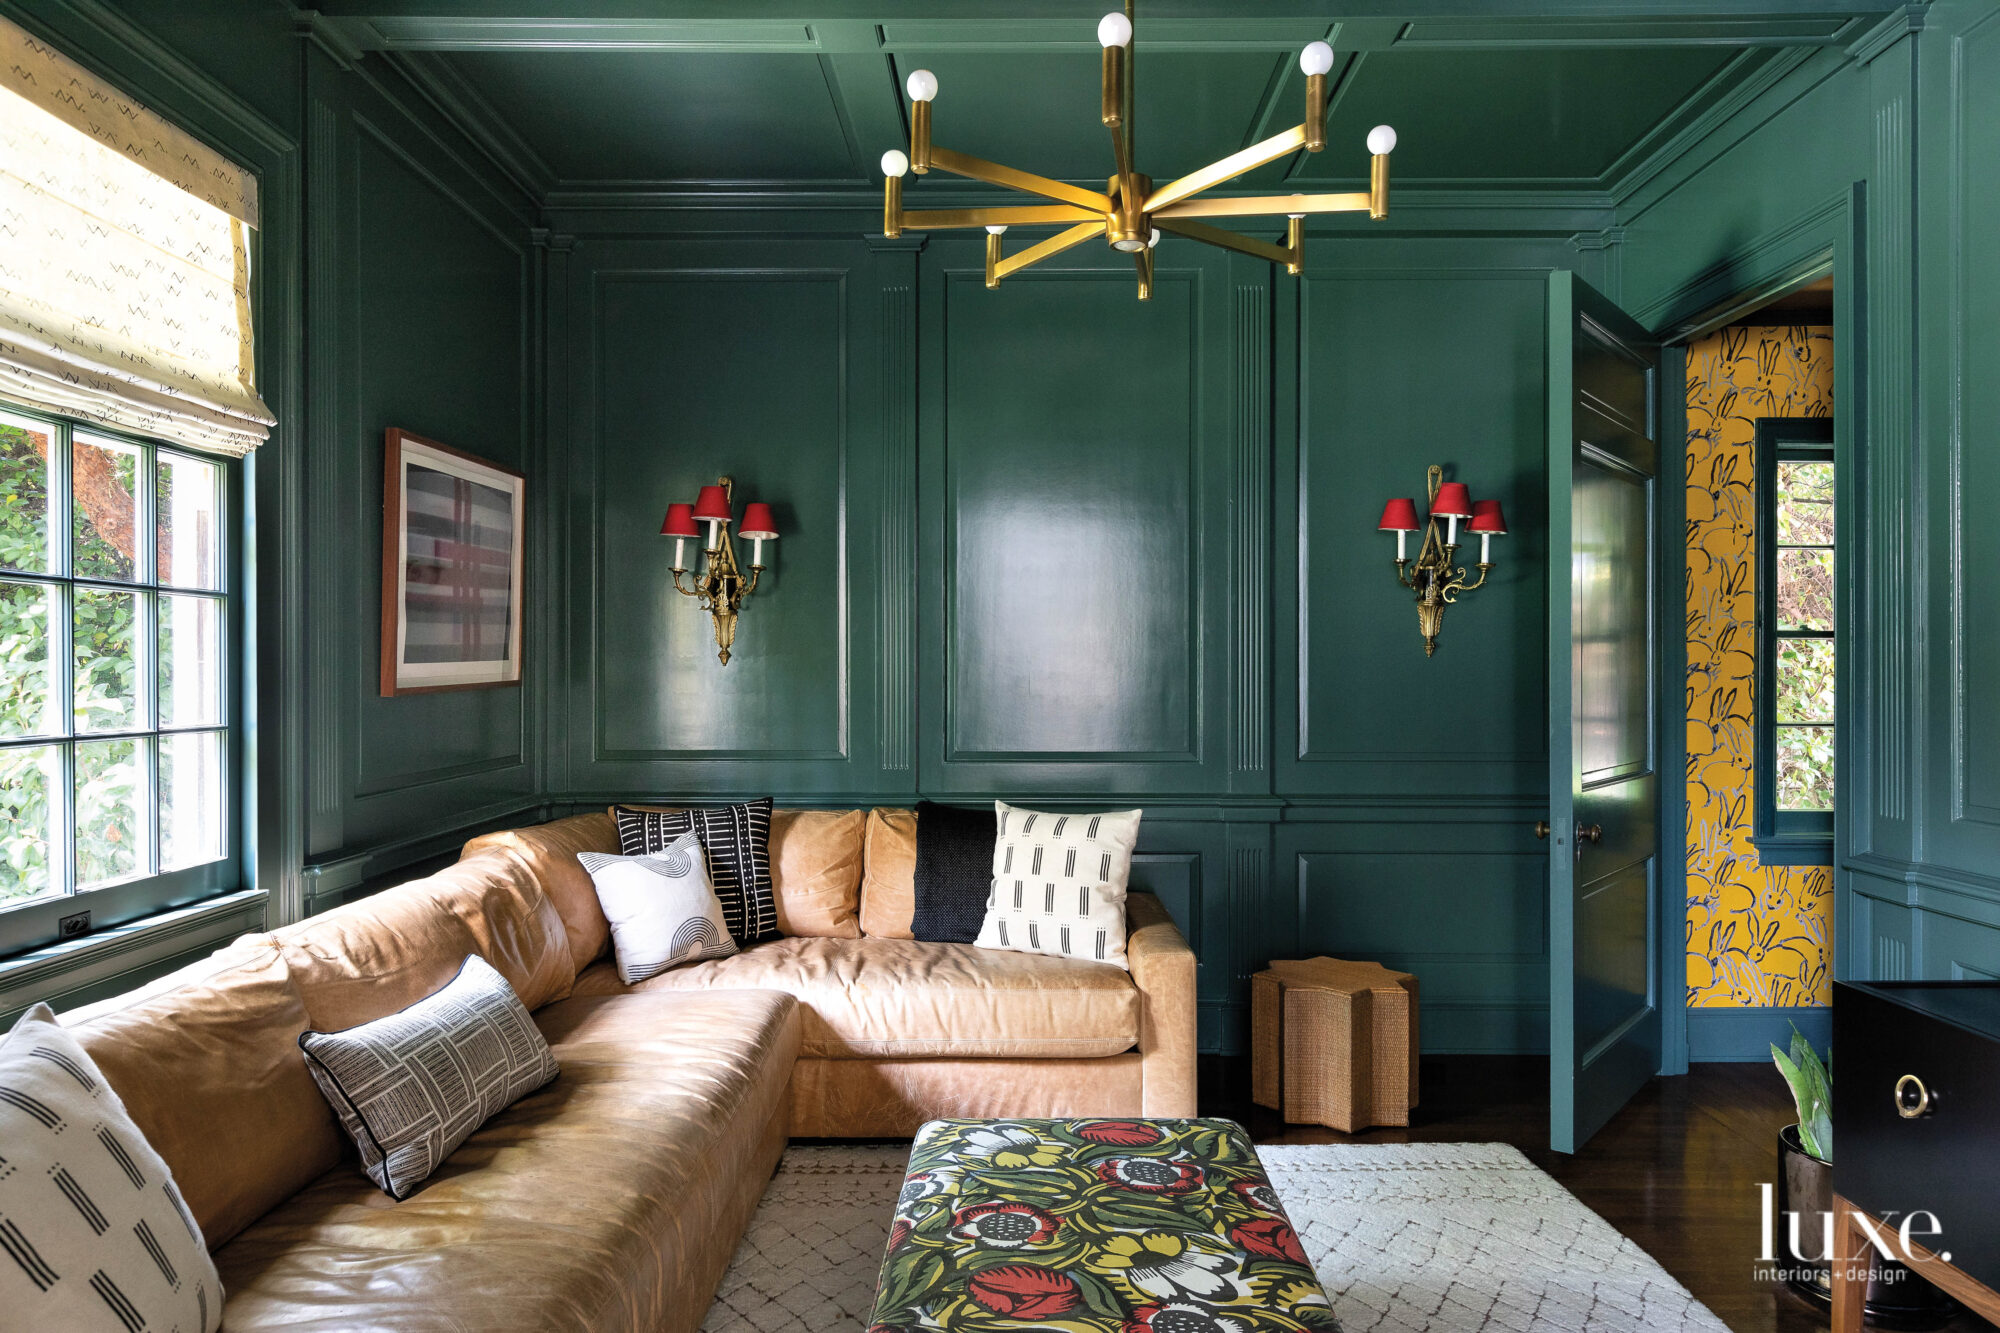 A den shows contrasting colors with dark green walls and a neutral toned couch.